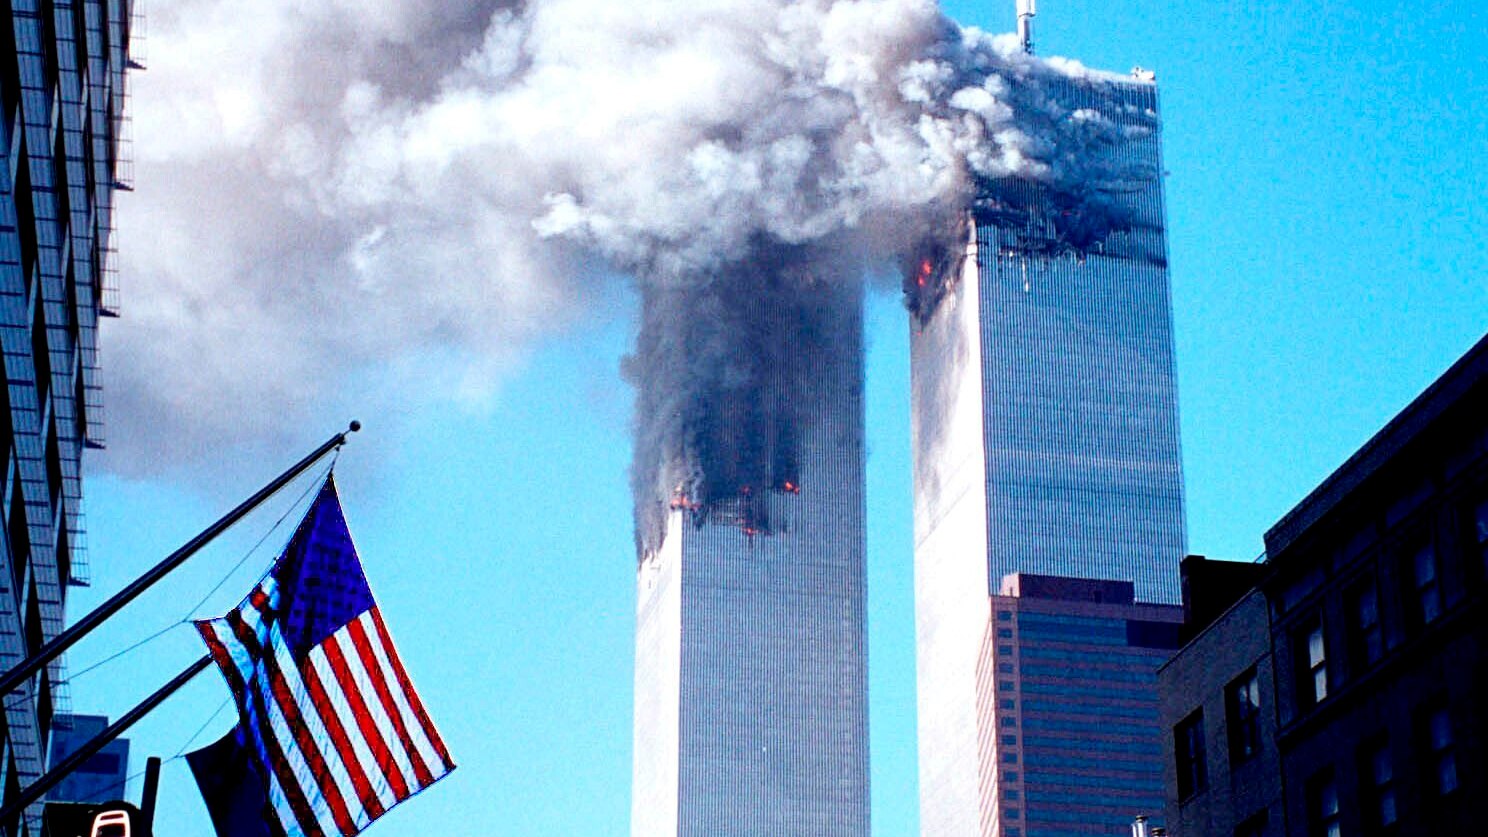 How 9/11 changed everything: A first responder reflection